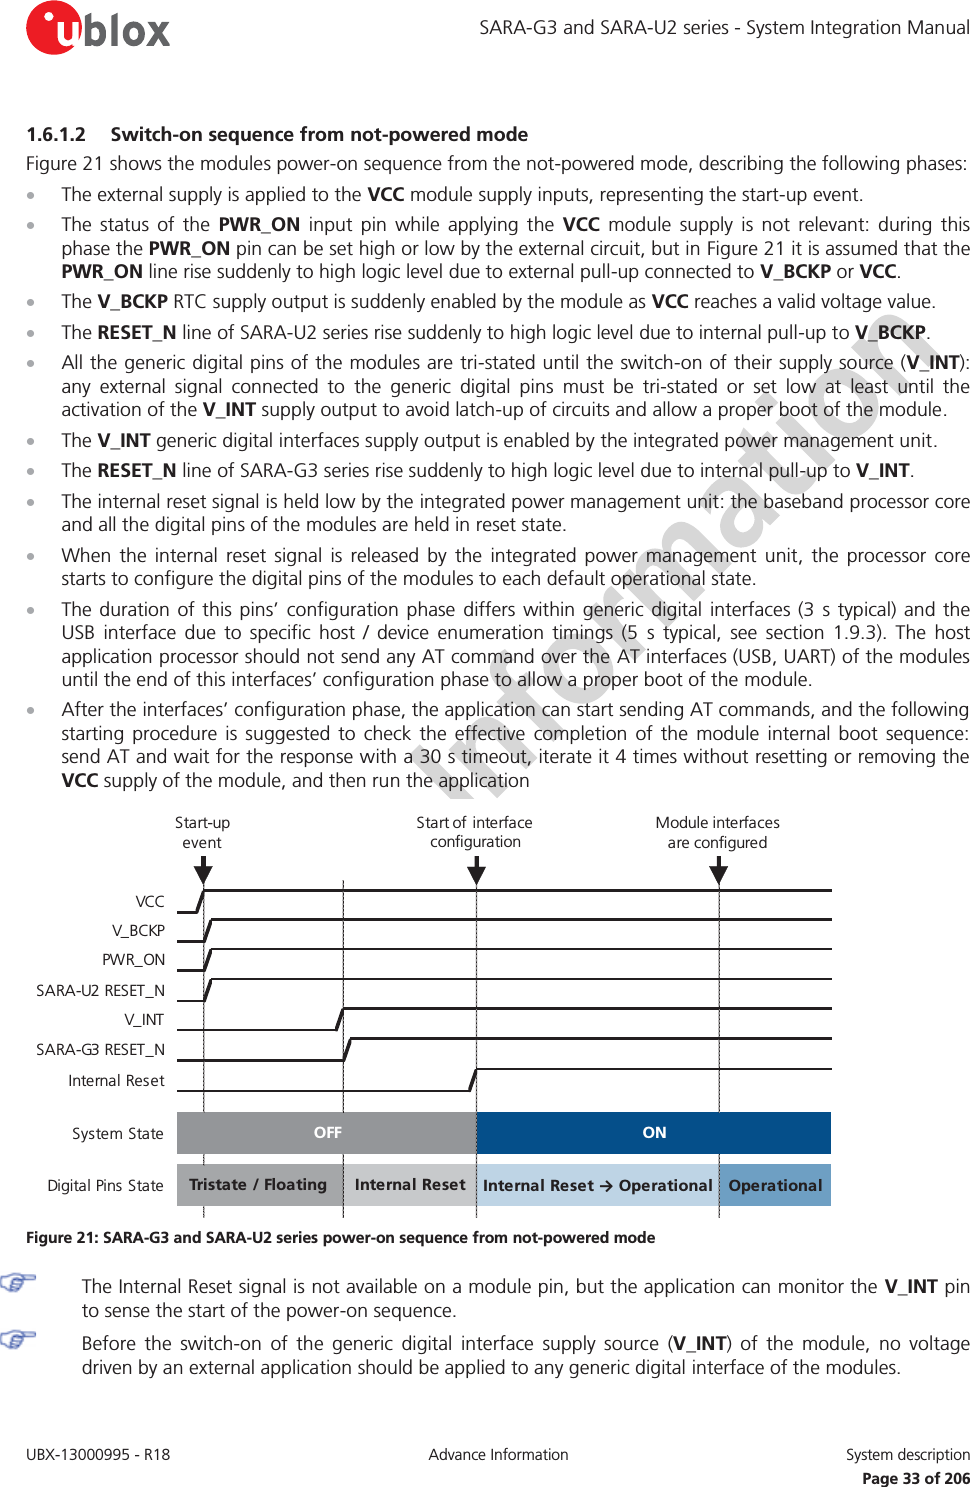 SARA-G3 and SARA-U2 series - System Integration Manual UBX-13000995 - R18  Advance Information  System description   Page 33 of 206 1.6.1.2 Switch-on sequence from not-powered mode Figure 21 shows the modules power-on sequence from the not-powered mode, describing the following phases: x The external supply is applied to the VCC module supply inputs, representing the start-up event. x The status of the PWR_ON input pin while applying the VCC module supply is not relevant: during this phase the PWR_ON pin can be set high or low by the external circuit, but in Figure 21 it is assumed that the PWR_ON line rise suddenly to high logic level due to external pull-up connected to V_BCKP or VCC. x The V_BCKP RTC supply output is suddenly enabled by the module as VCC reaches a valid voltage value. x The RESET_N line of SARA-U2 series rise suddenly to high logic level due to internal pull-up to V_BCKP. x All the generic digital pins of the modules are tri-stated until the switch-on of their supply source (V_INT): any external signal connected to the generic digital pins must be tri-stated or set low at least until the activation of the V_INT supply output to avoid latch-up of circuits and allow a proper boot of the module. x The V_INT generic digital interfaces supply output is enabled by the integrated power management unit. x The RESET_N line of SARA-G3 series rise suddenly to high logic level due to internal pull-up to V_INT. x The internal reset signal is held low by the integrated power management unit: the baseband processor core and all the digital pins of the modules are held in reset state.  x When the internal reset signal is released by the integrated power management unit, the processor core starts to configure the digital pins of the modules to each default operational state. x The duration of this pins’ configuration phase differs within generic digital interfaces (3 s typical) and the USB interface due to specific host / device enumeration timings (5 s typical, see section 1.9.3). The host application processor should not send any AT command over the AT interfaces (USB, UART) of the modules until the end of this interfaces’ configuration phase to allow a proper boot of the module. x After the interfaces’ configuration phase, the application can start sending AT commands, and the following starting procedure is suggested to check the effective completion of the module internal boot sequence: send AT and wait for the response with a 30 s timeout, iterate it 4 times without resetting or removing the VCC supply of the module, and then run the application  VCCV_BCKPPWR_ONSARA-U2 RESET_NV_INTSARA-G3 RESET_NInternal ResetSystem StateDigital Pins StateInternal Reset → Operational OperationalTristate / Floating OFF ONInternal ResetStart of  interface configurationModule interfaces are configuredStart-up event Figure 21: SARA-G3 and SARA-U2 series power-on sequence from not-powered mode  The Internal Reset signal is not available on a module pin, but the application can monitor the V_INT pin to sense the start of the power-on sequence. Before the switch-on of the generic digital interface supply source (V_INT) of the module, no voltage driven by an external application should be applied to any generic digital interface of the modules. 